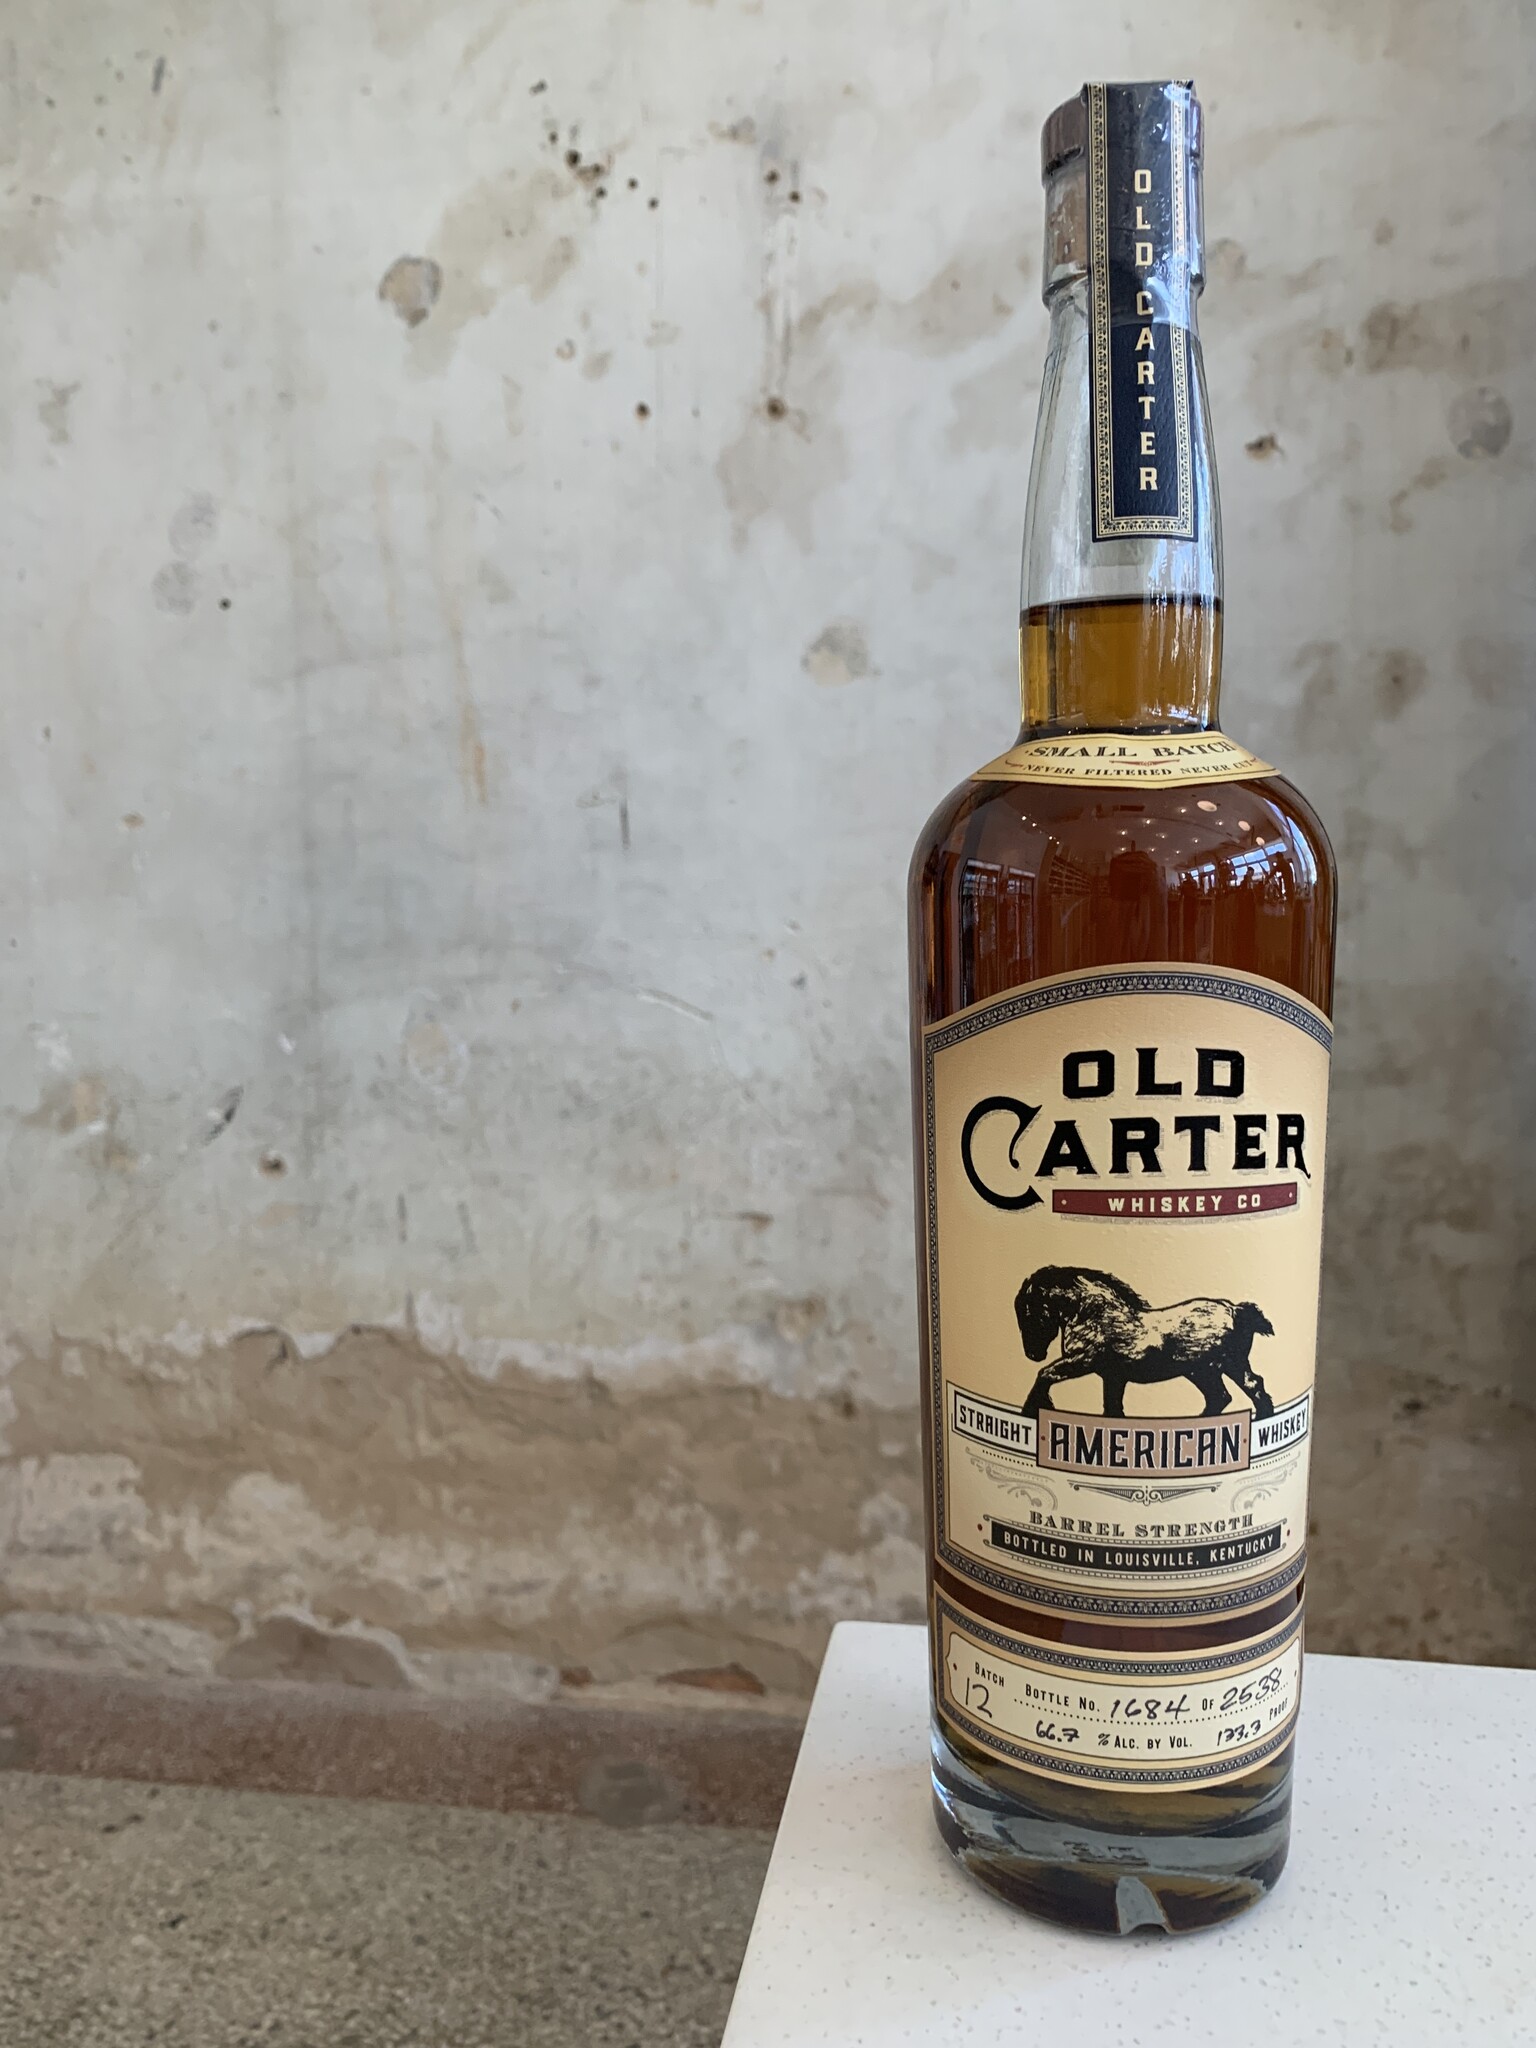 Old Carter Straight American Whiskey Batch 12 133.3 Proof